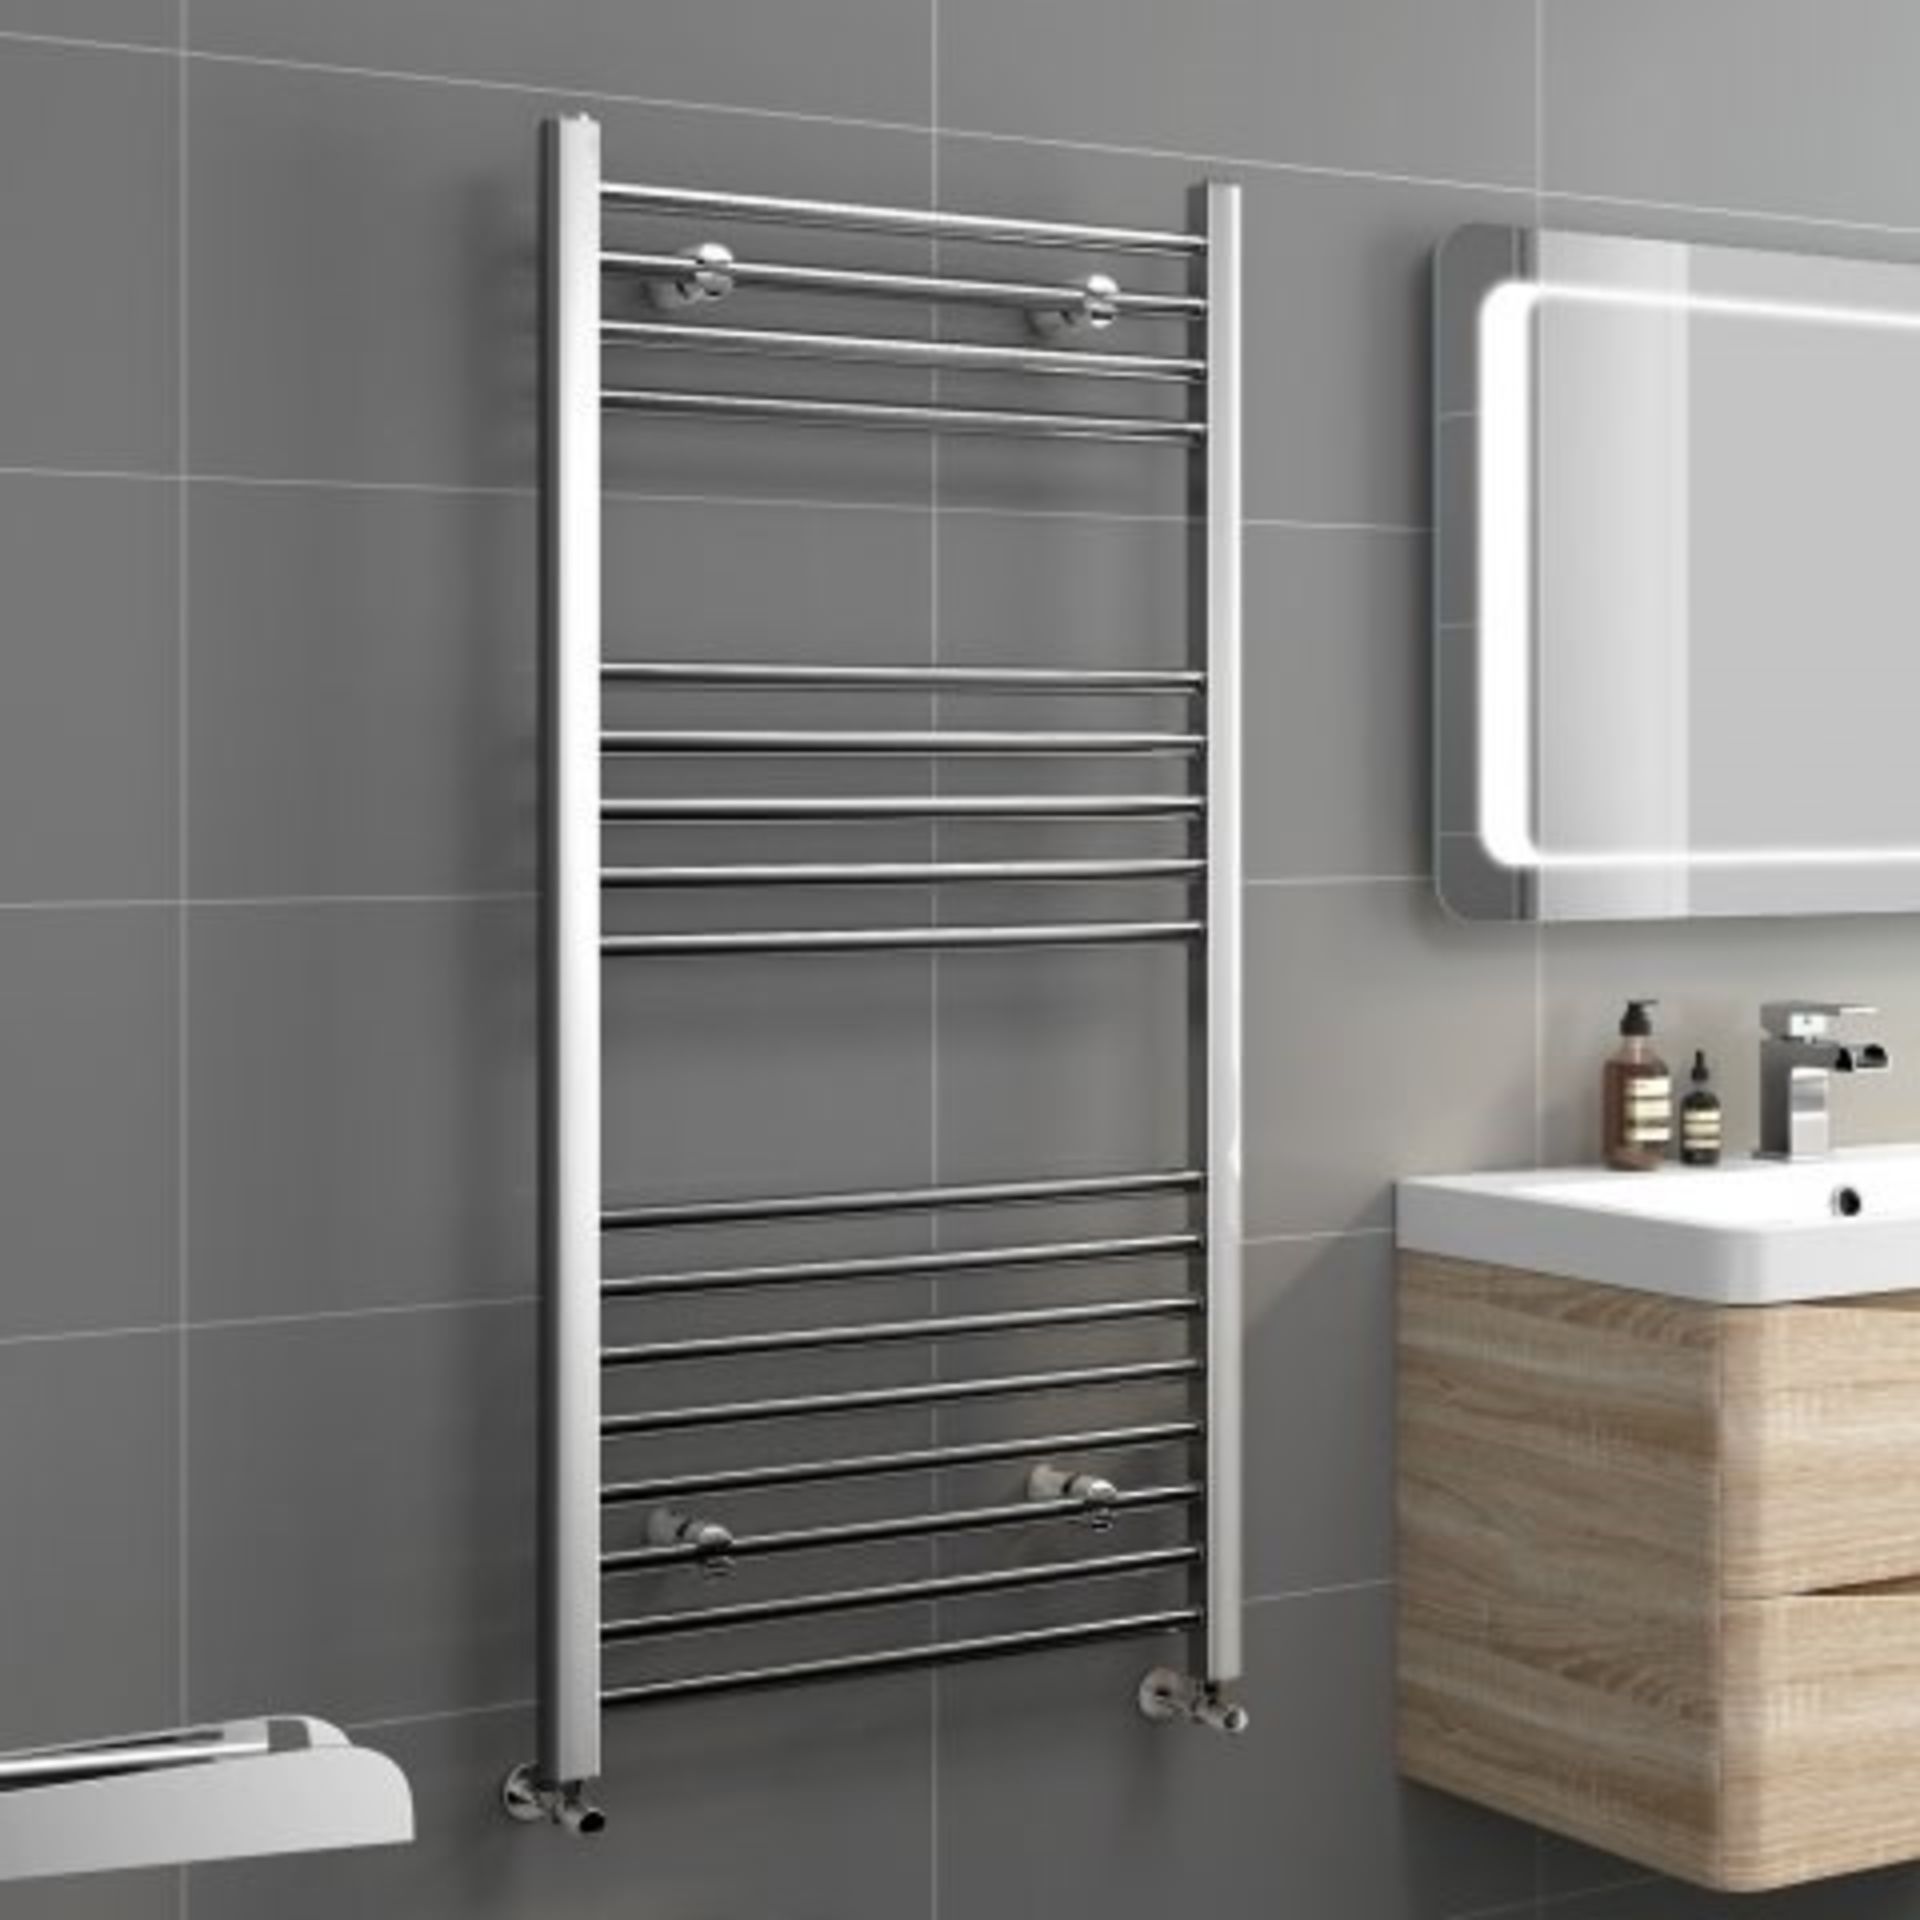 BRAND NEW BOXED 1200x600mm - 20mm Tubes - Chrome Heated Straight Rail Ladder Towel Radiator.RRP £ - Image 2 of 2